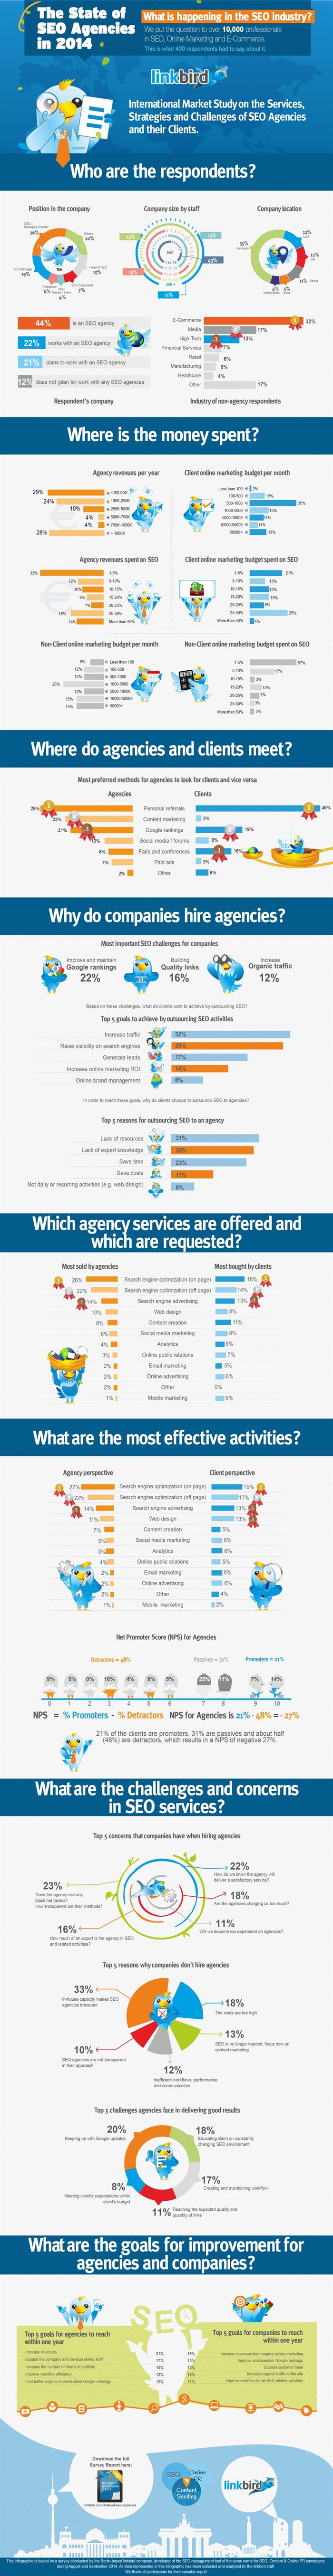 The State of SEO Agencies 2014